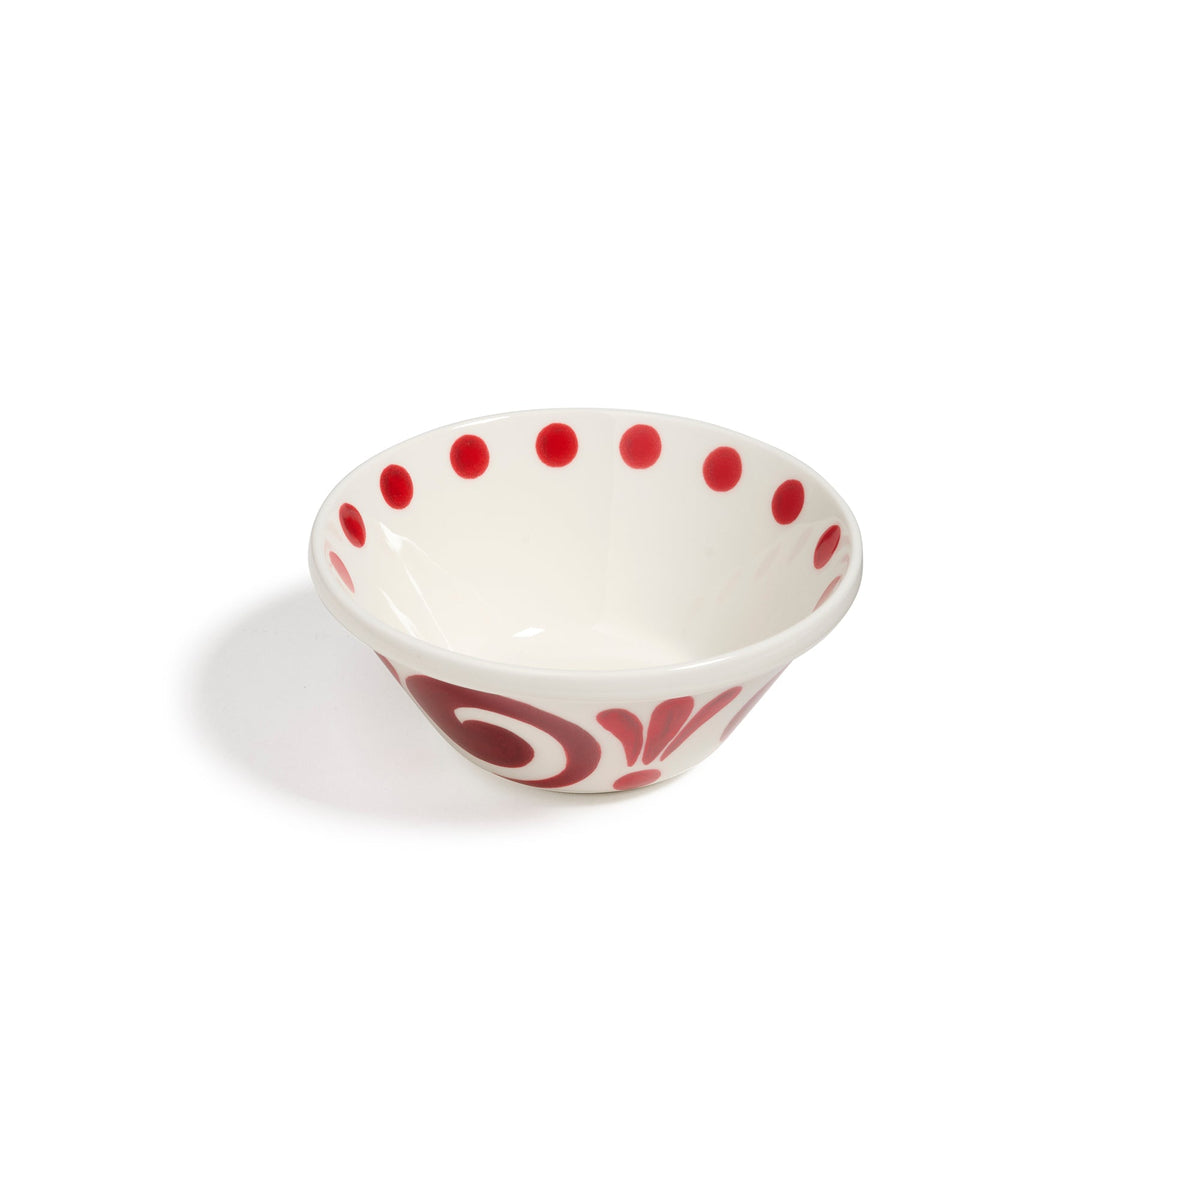 Kallos Bowl in Deep Red on White